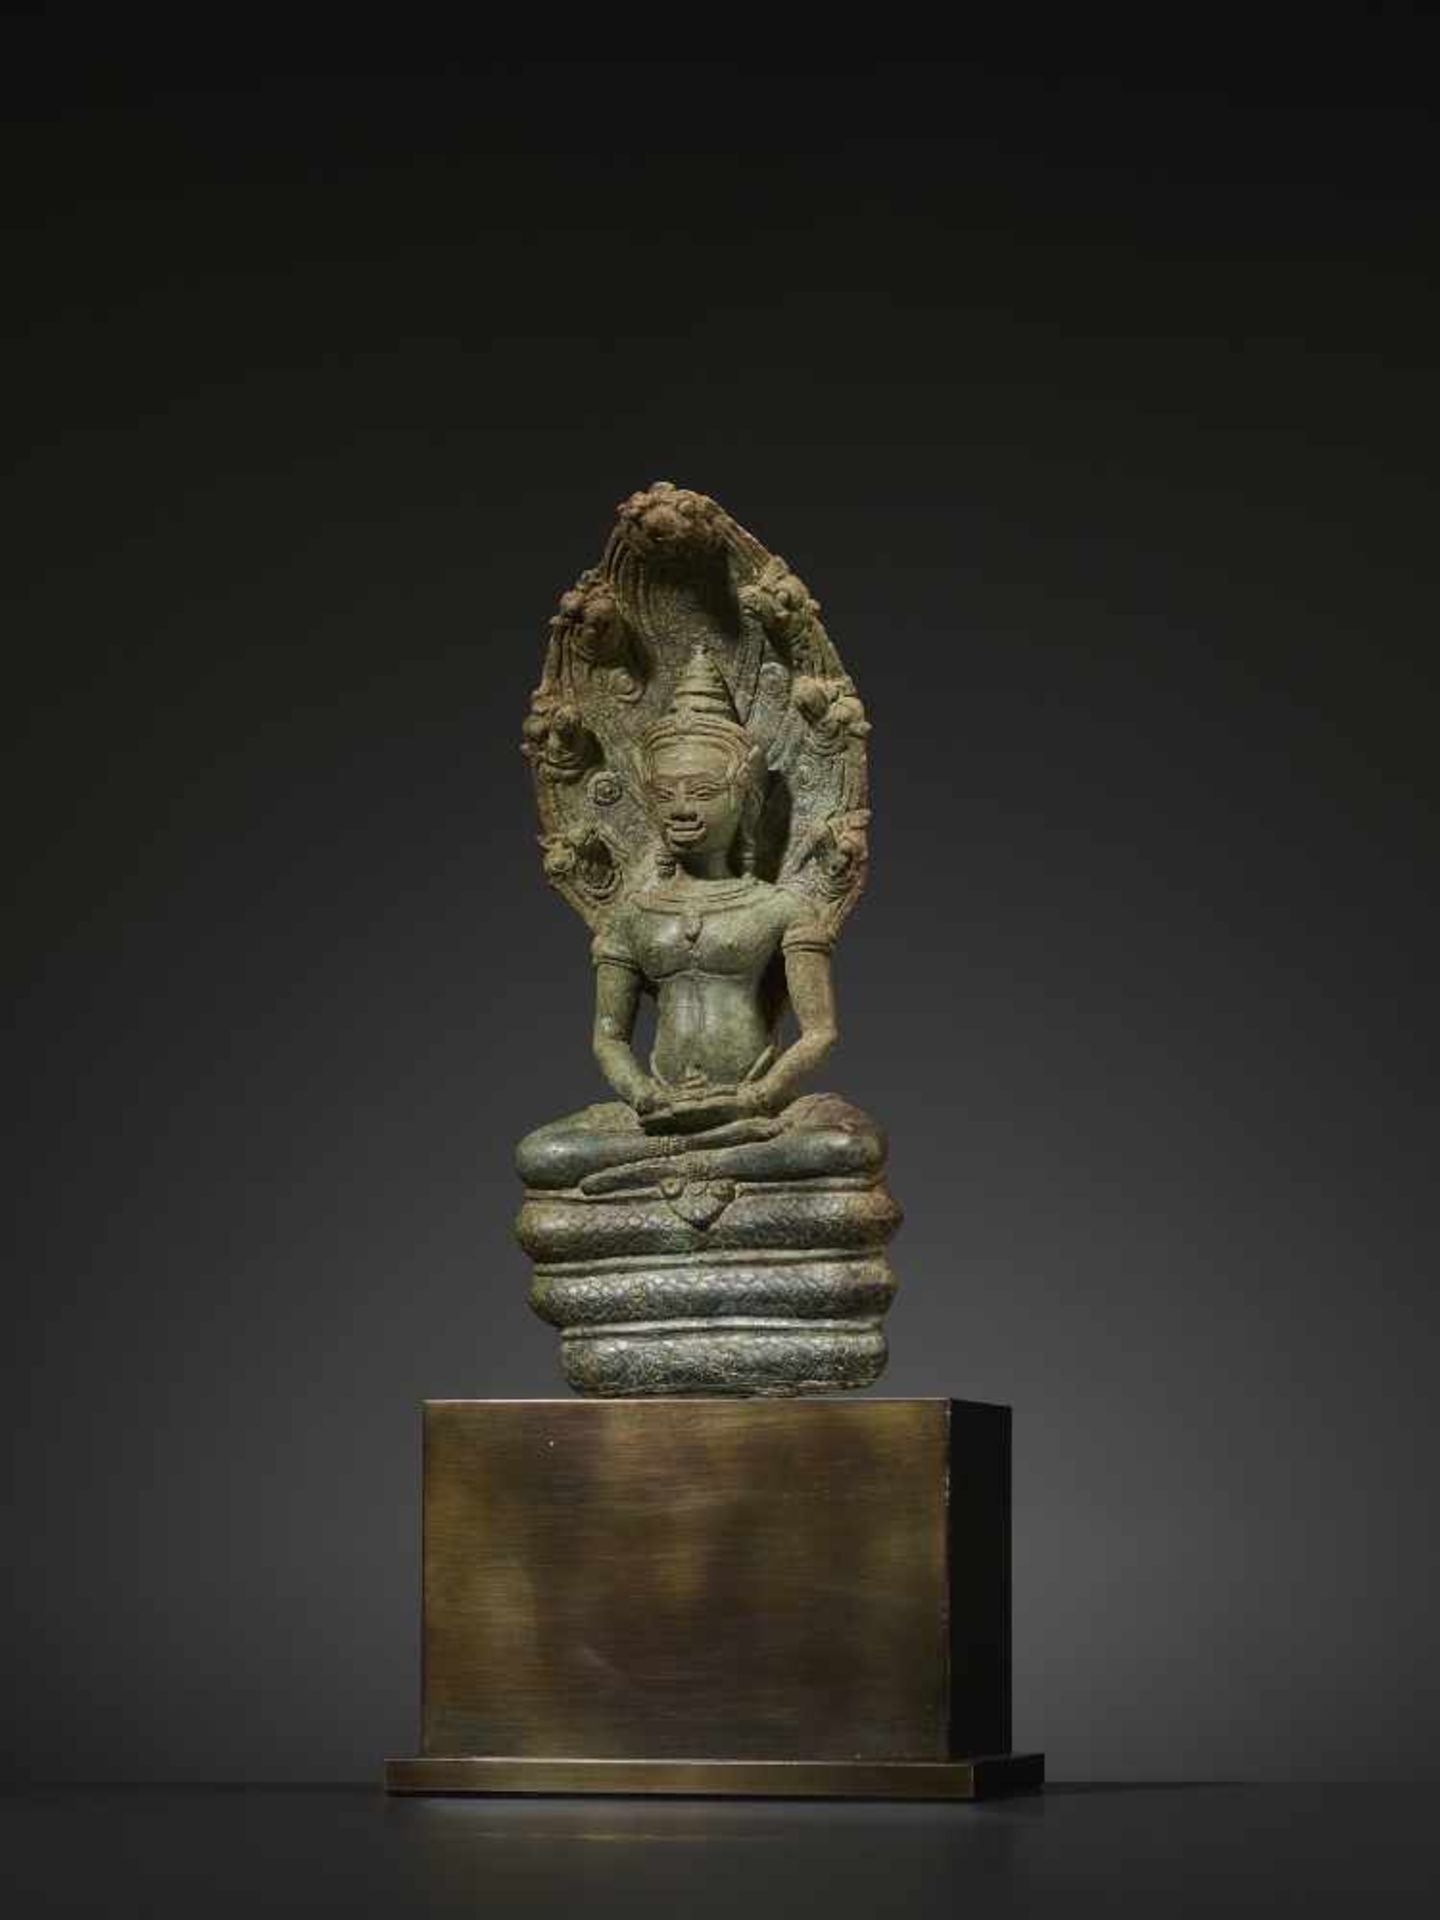 A KHMER BRONZE BUDDHA MUCHALINDA Cambodia, Angkor period, 12th century. Finely cast and incised - Image 2 of 8